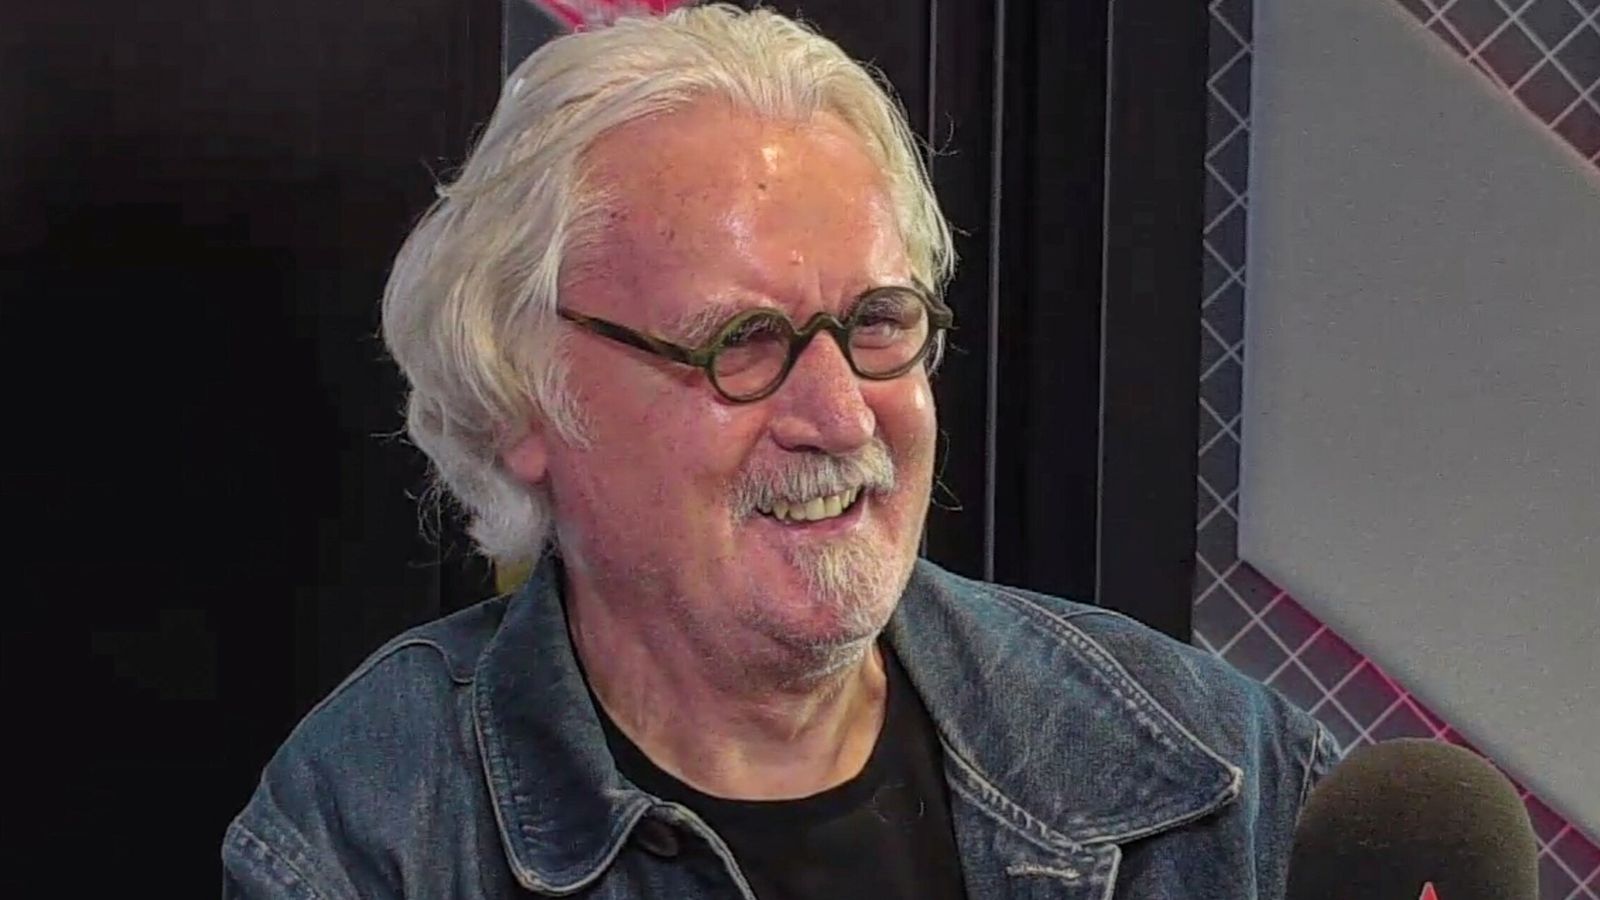 Billy Connolly on dealing with Parkinson’s disease: Comedian says he has learnt to ‘hypnotise’ his hand when it shakes